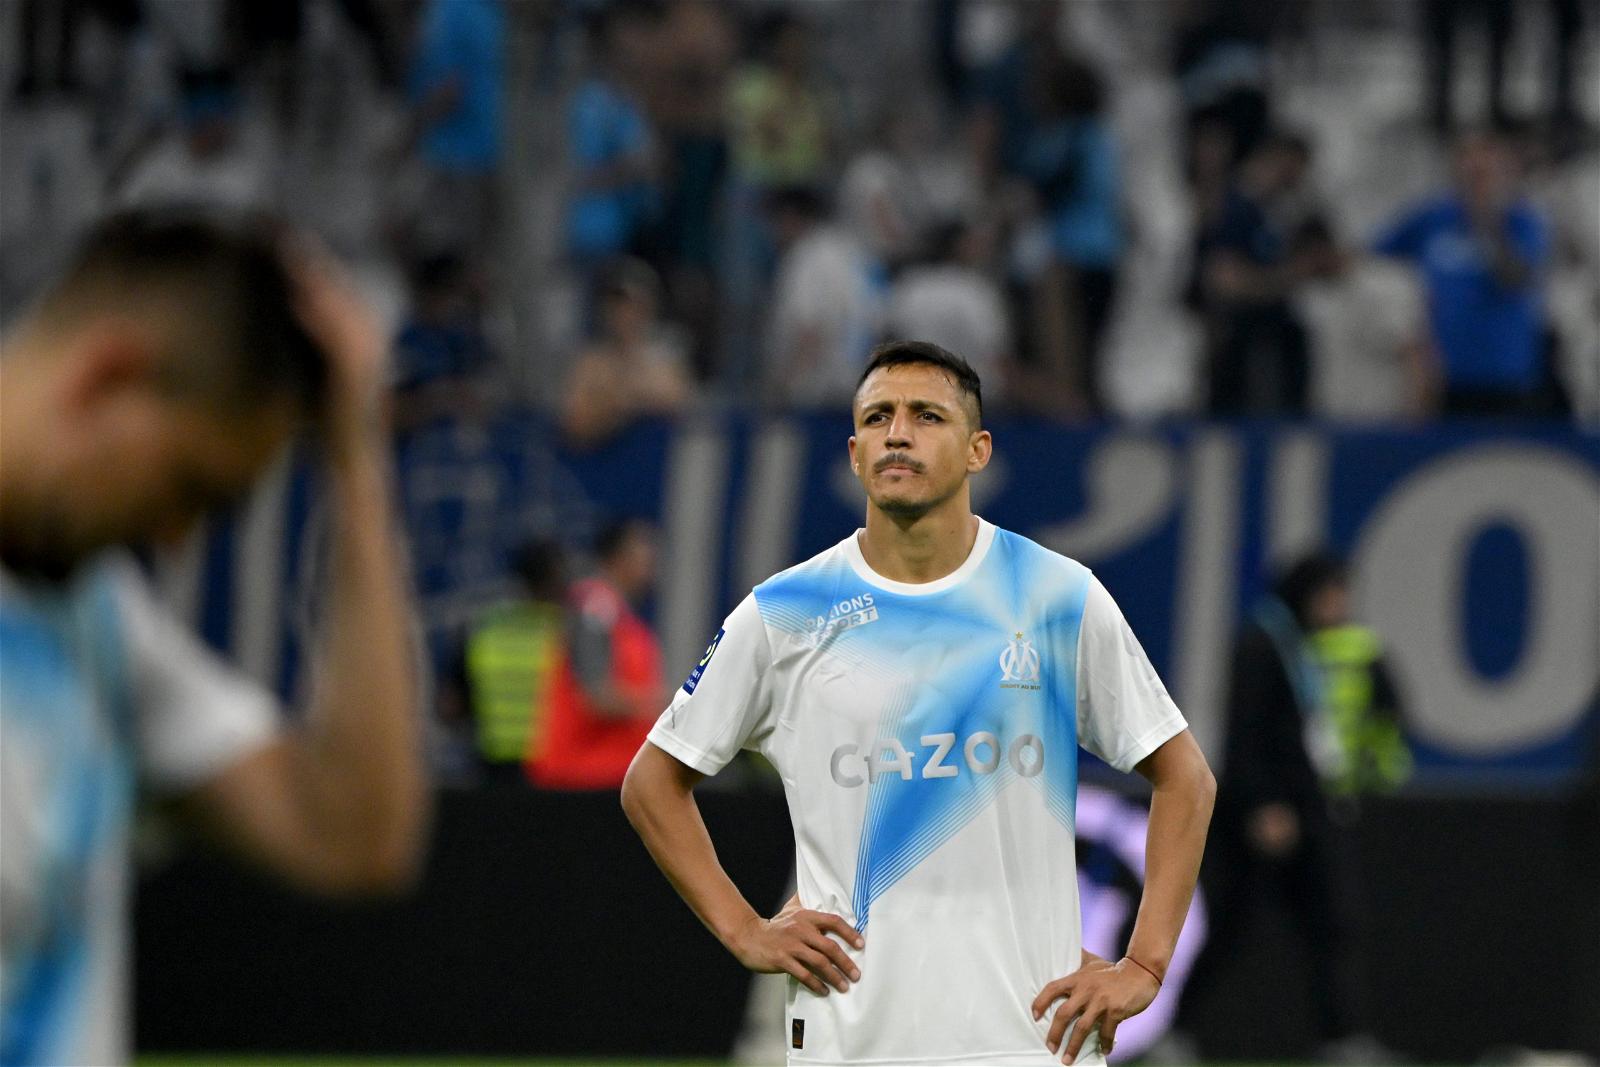 Marseille offer out-of-contract Sanchez improved deal to remain at club